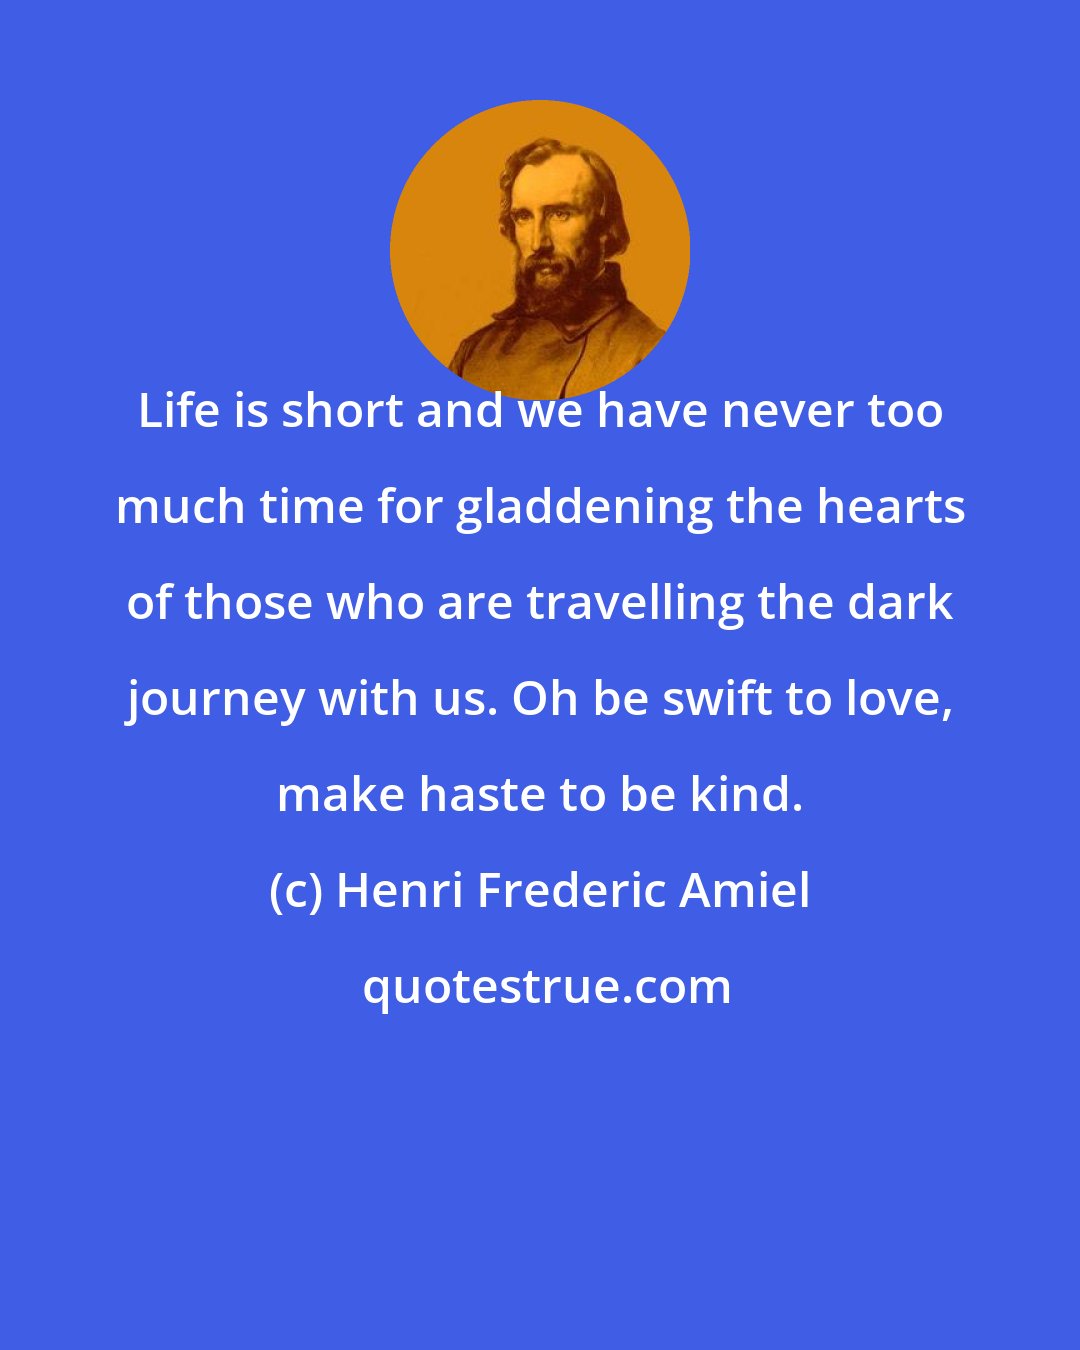 Henri Frederic Amiel: Life is short and we have never too much time for gladdening the hearts of those who are travelling the dark journey with us. Oh be swift to love, make haste to be kind.